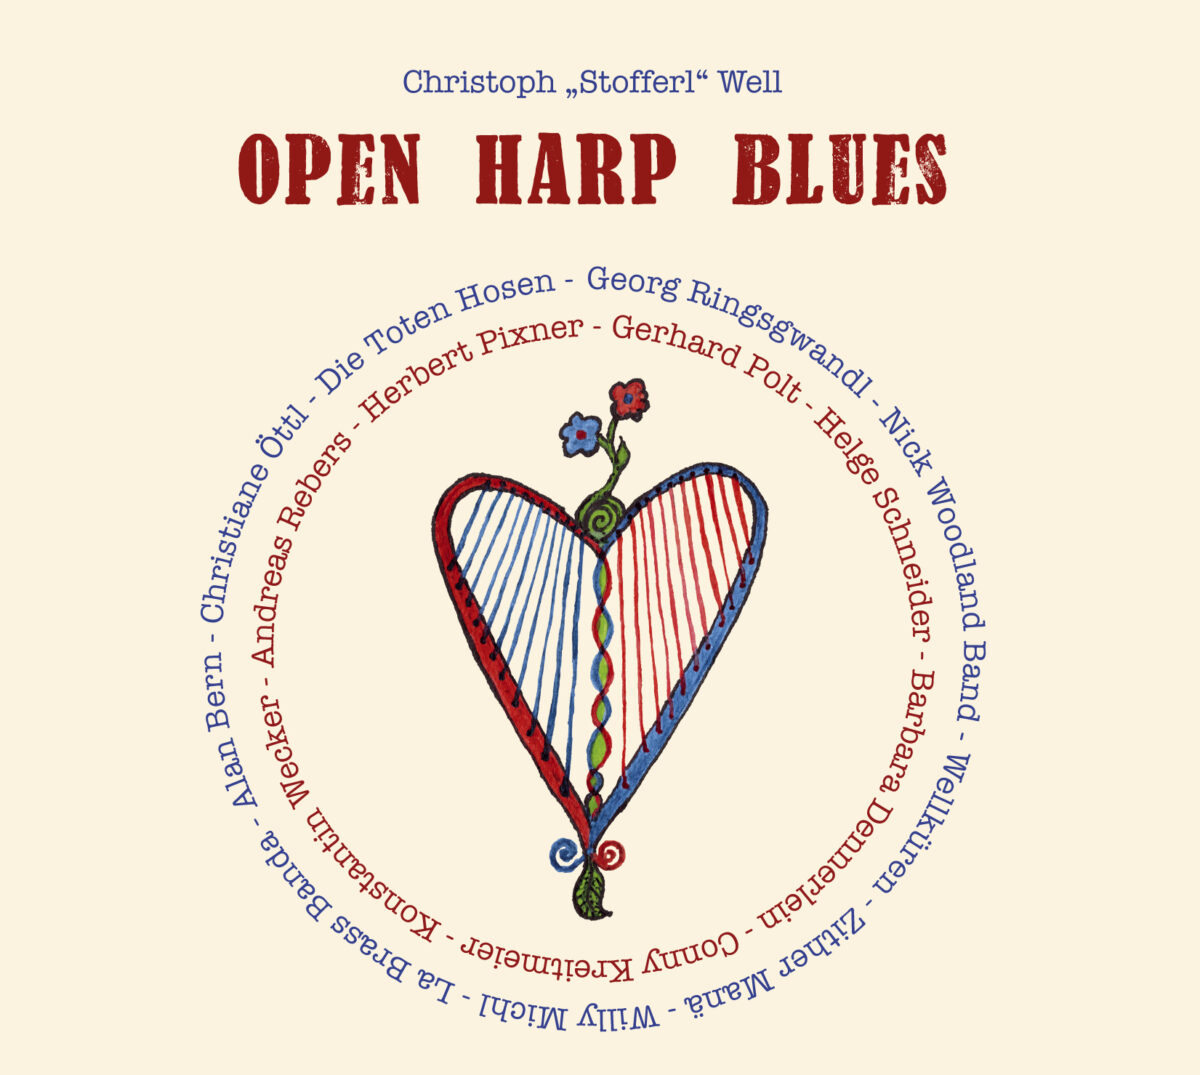 Christoph "Stofferl" Well - Open Harp Blues